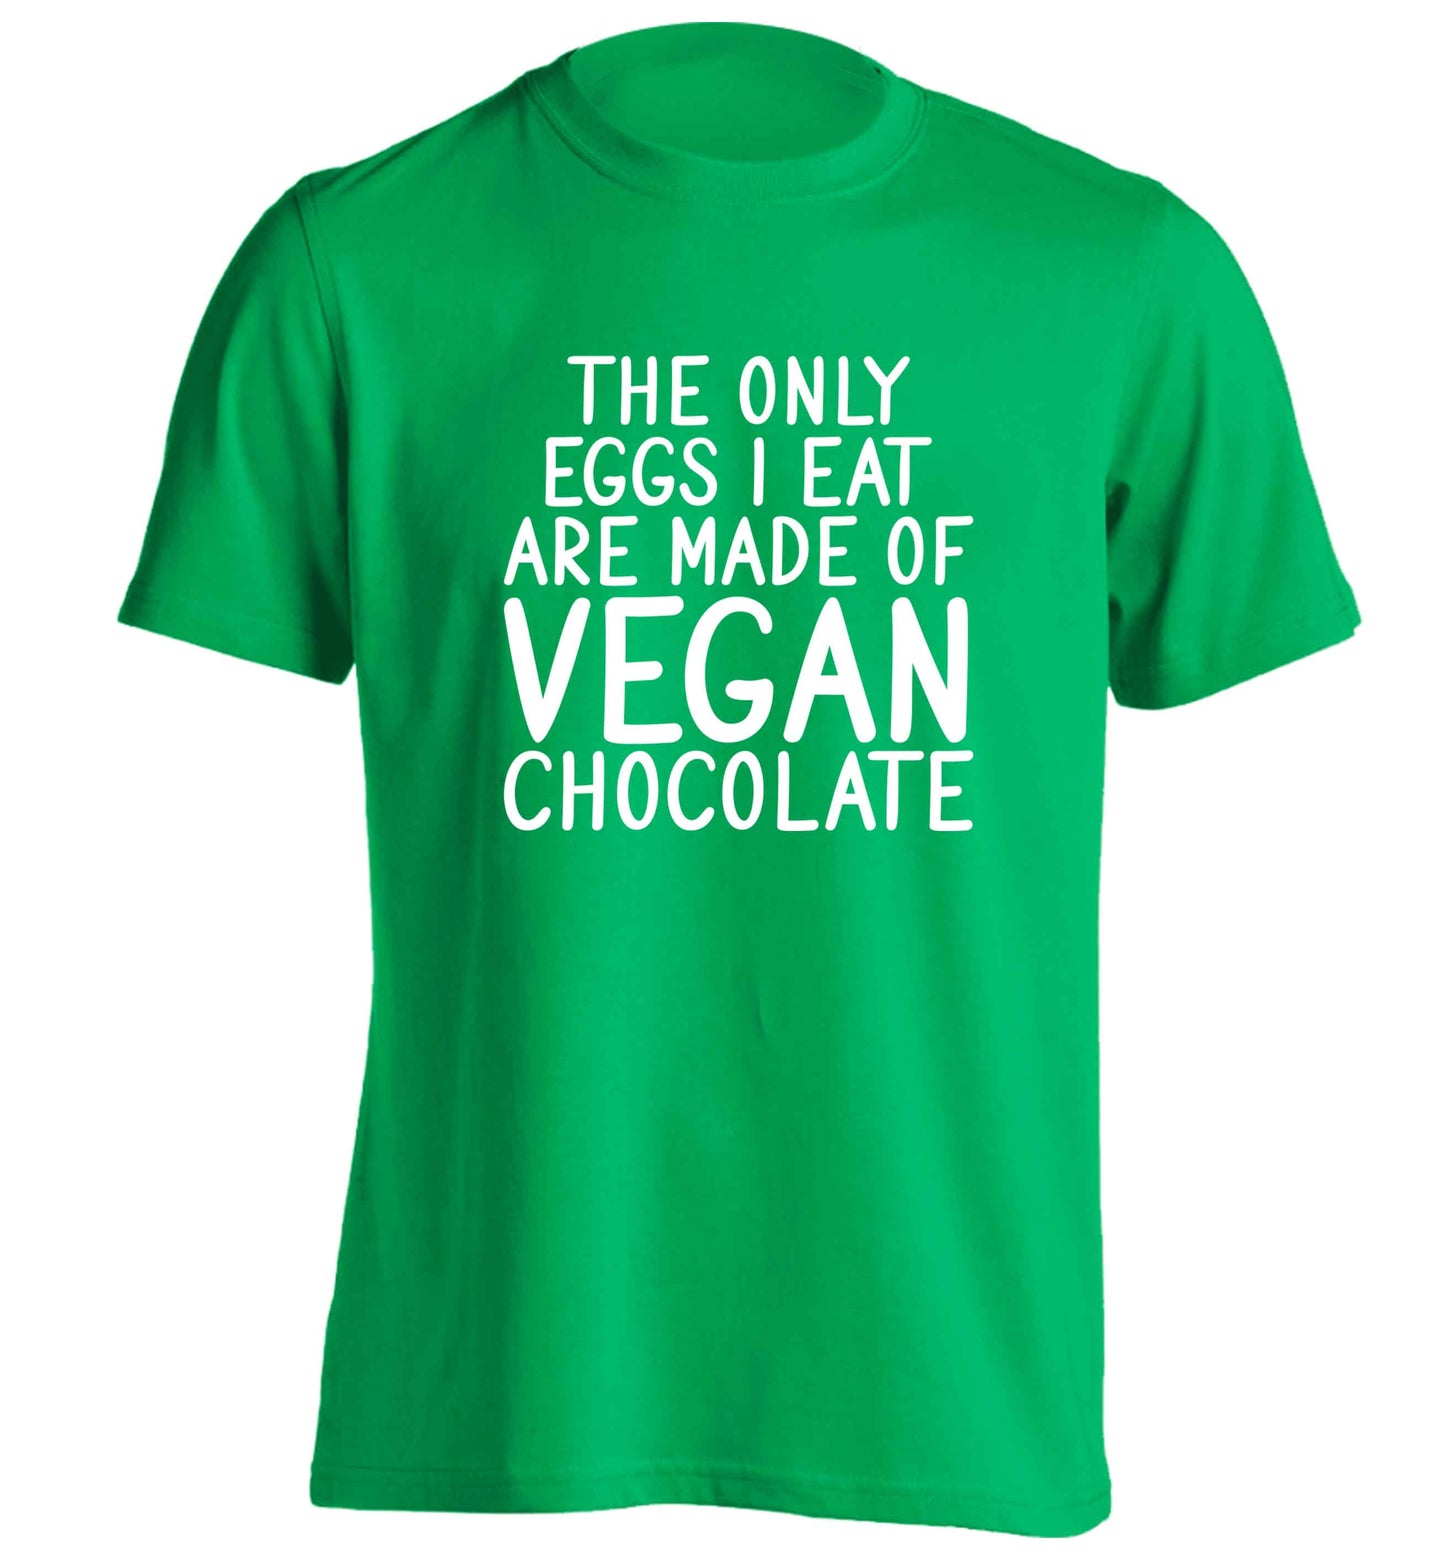 The only eggs I eat are made of vegan chocolate adults unisex green Tshirt 2XL